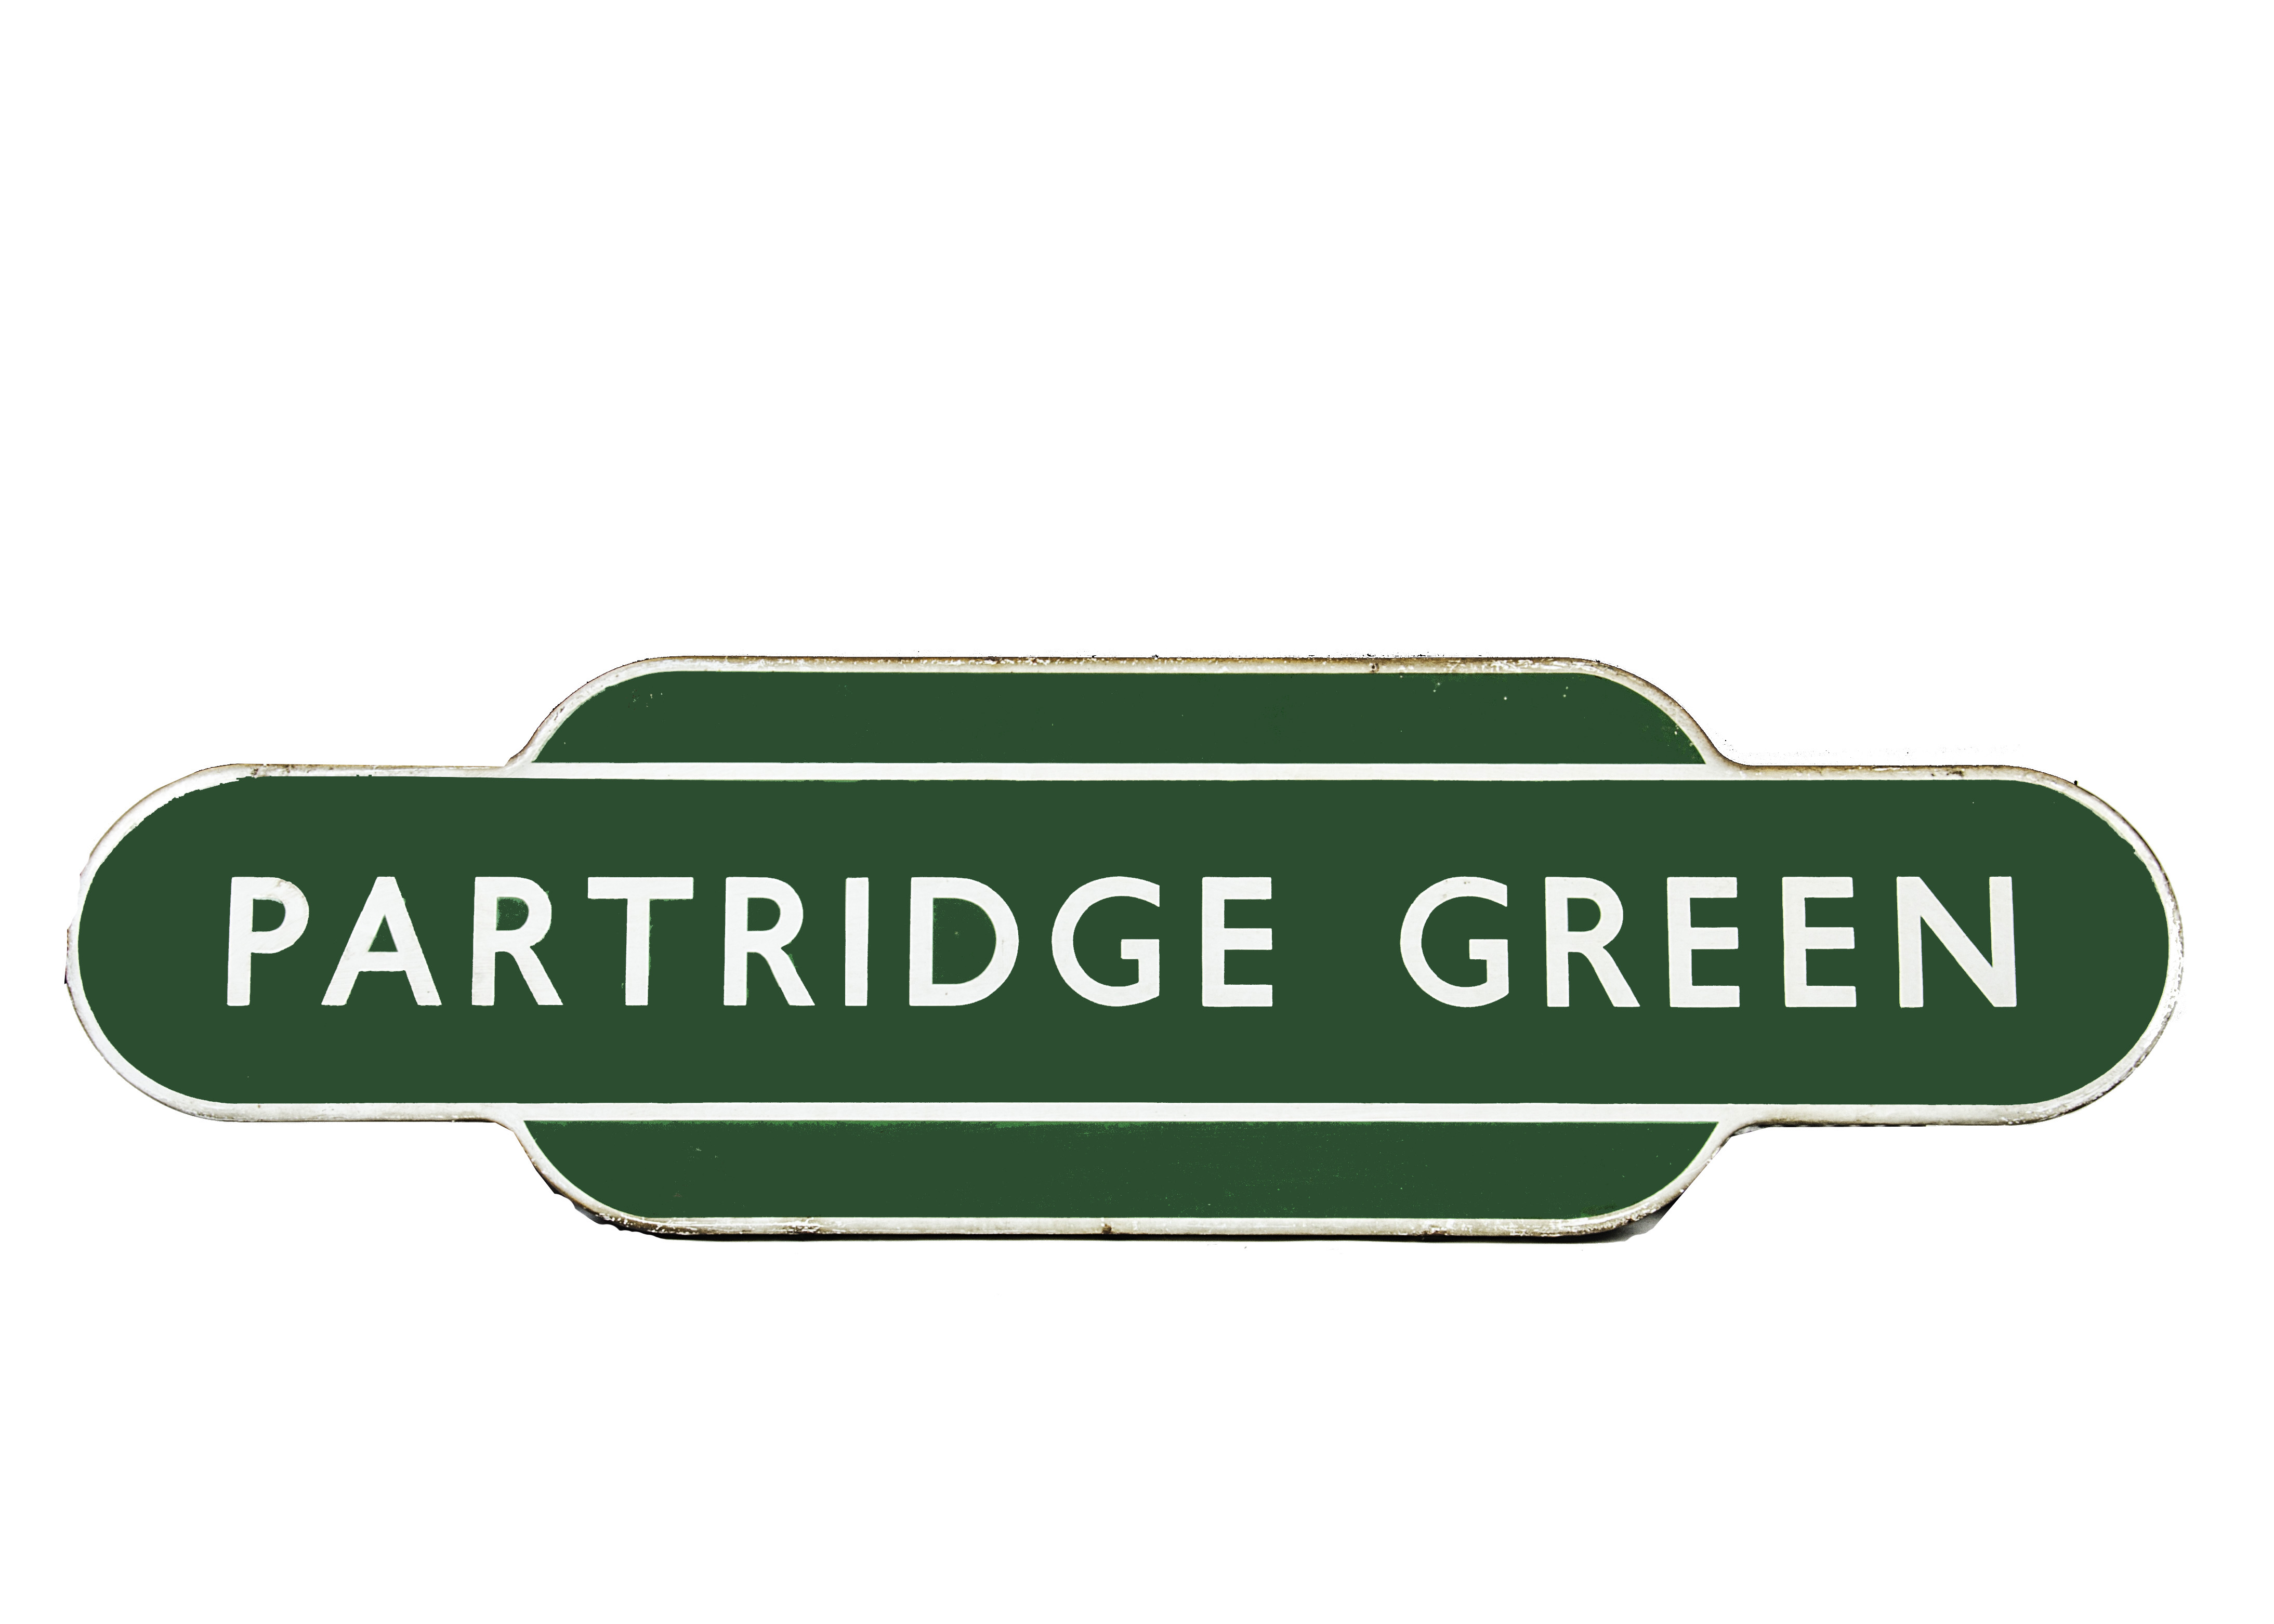 Partridge Green BR(S) Station Totem, overall VG, no significant chips, otherwise a few very minor